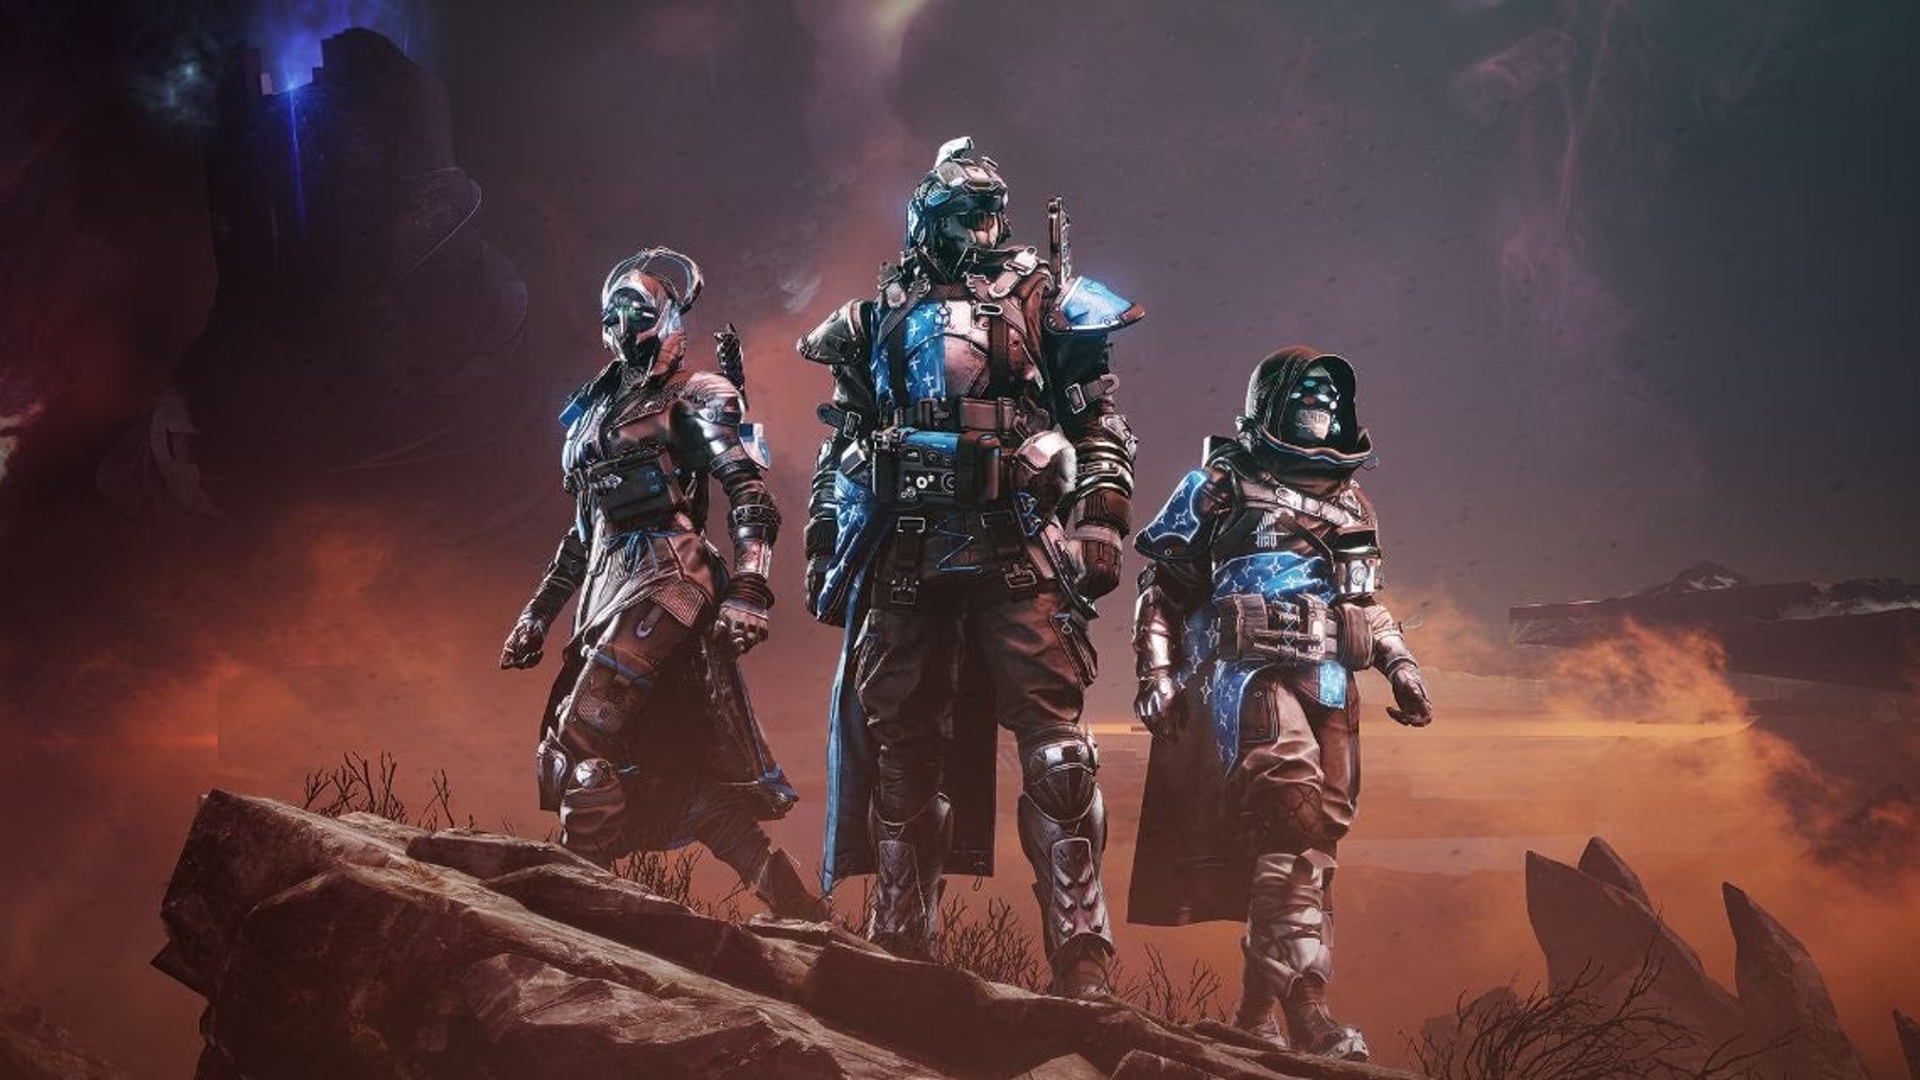 Destiny 2: Three guardians wearing brown armor sets stand on a rock surrounded by a red, dusty landscape